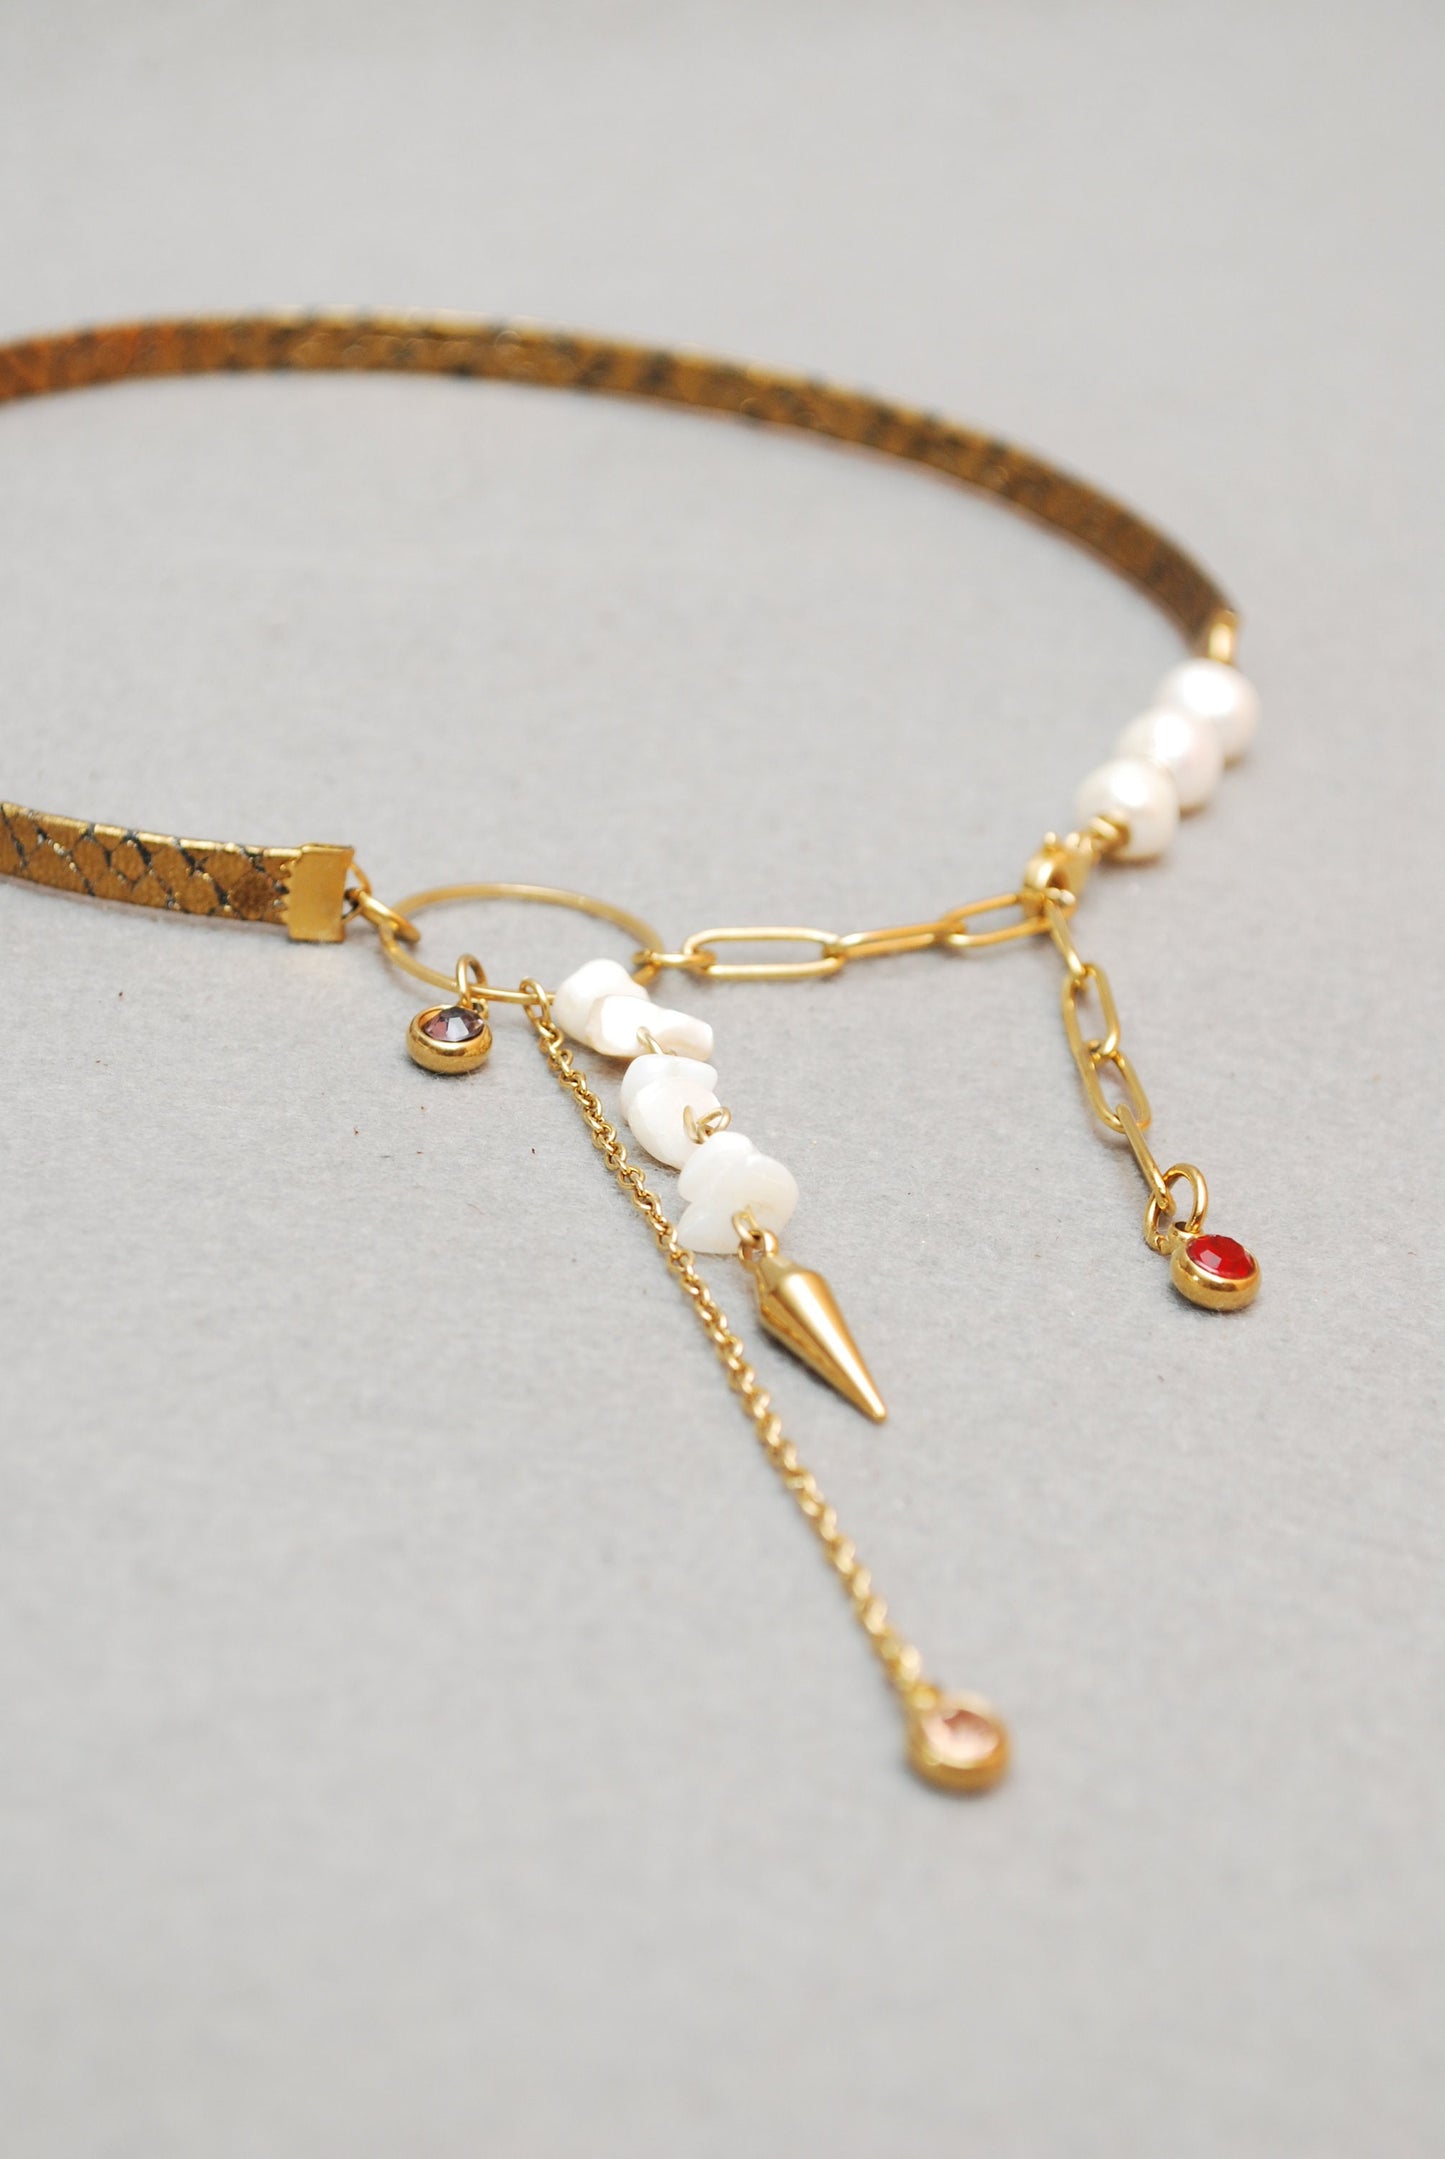 Sexy Snake, Gold Leather & Necklace Choker,  Stainless Steel Gold Chain, With Freshwater Pearls, Spike and rhinestone crystal beads charms